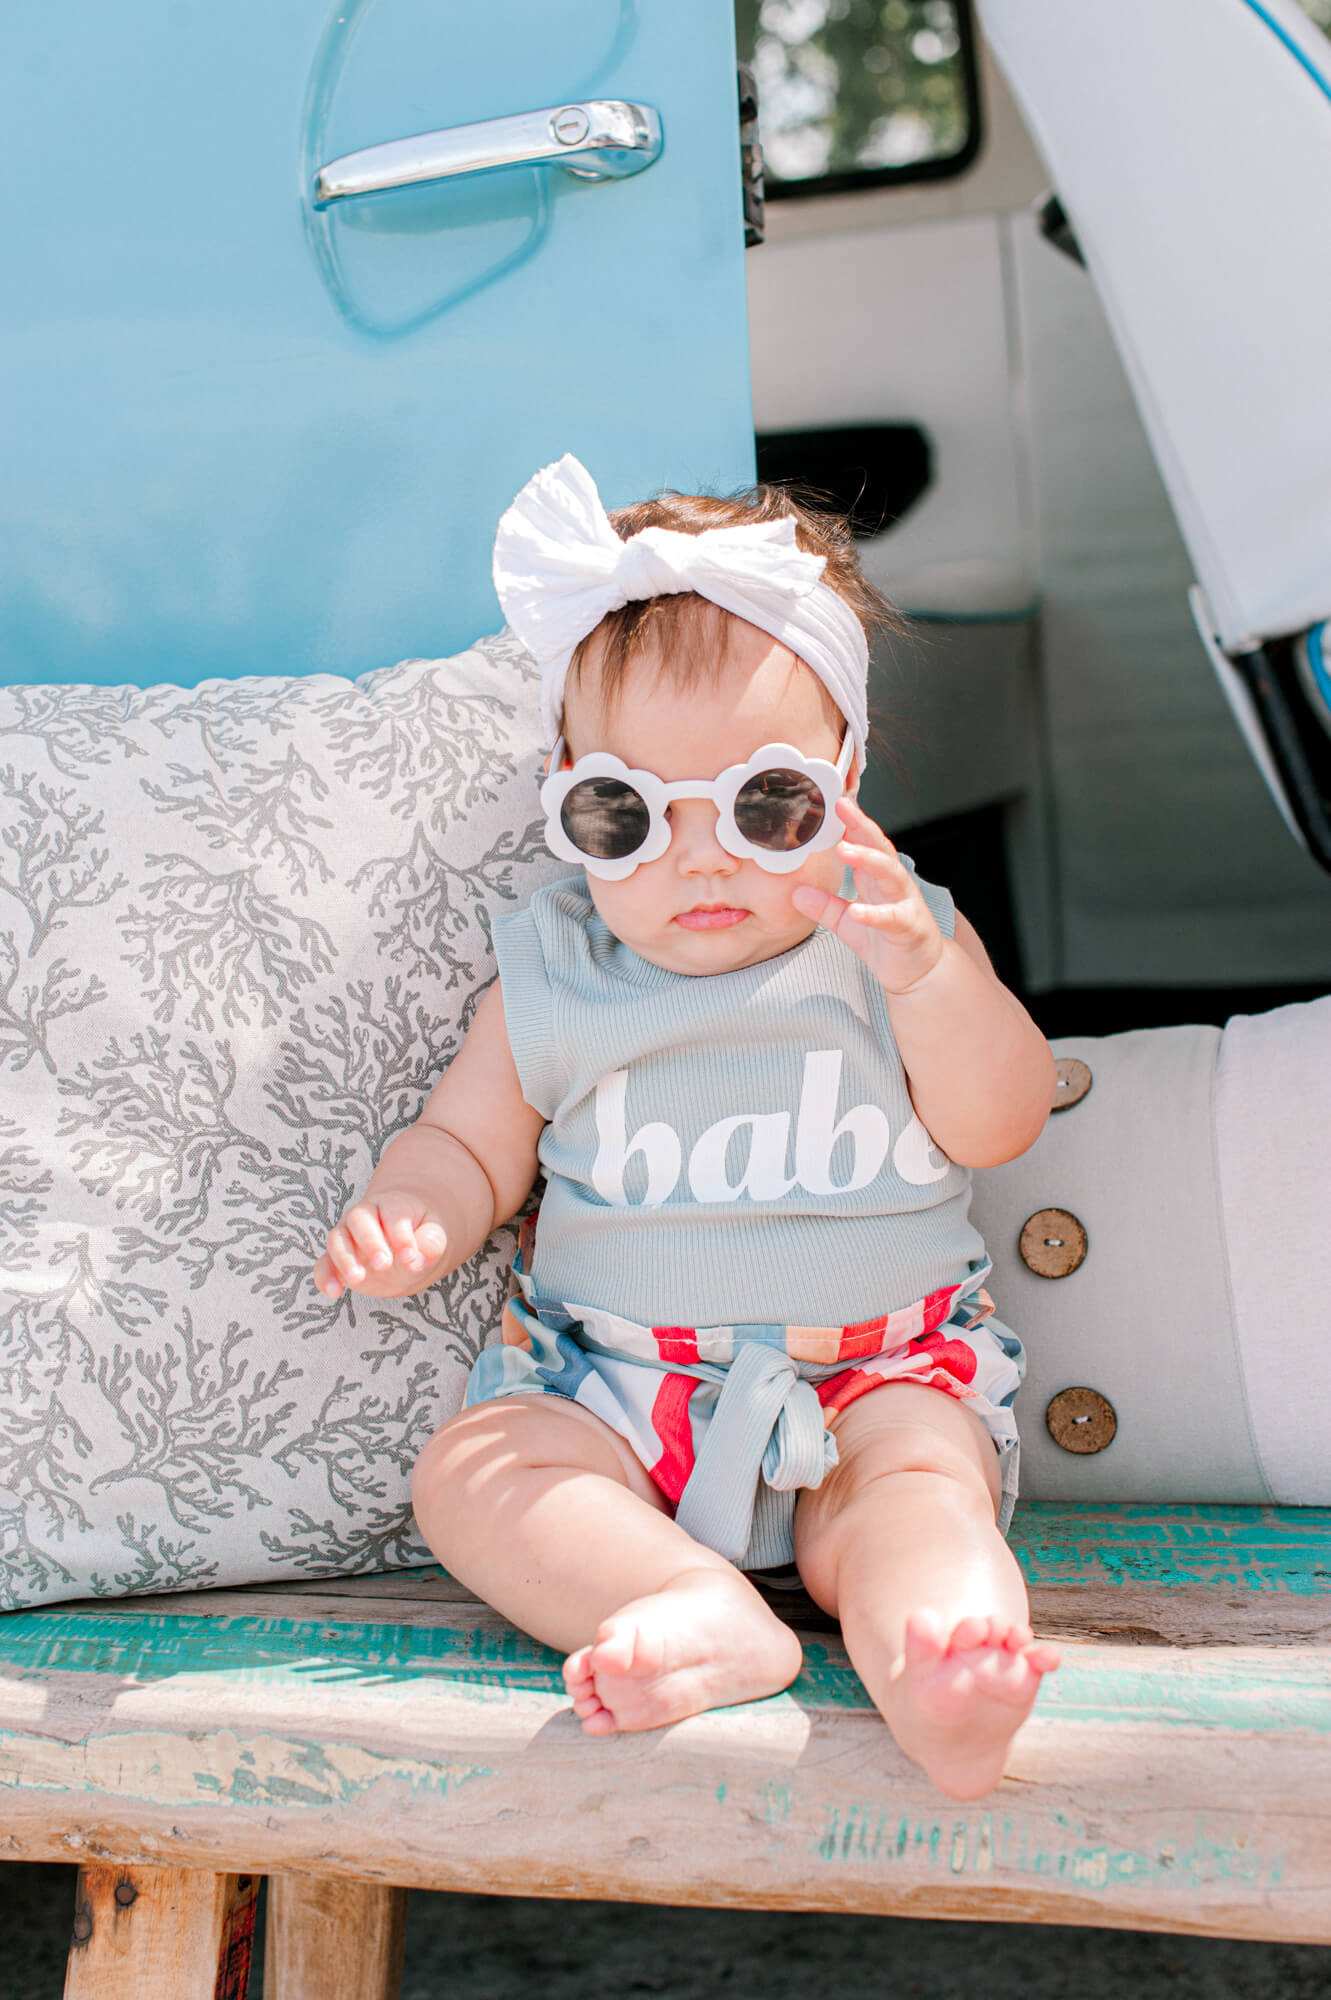 Adorable little beach baby holding her sunnies and looking at the camera on a hot summer day pediatric dentists in Orlando